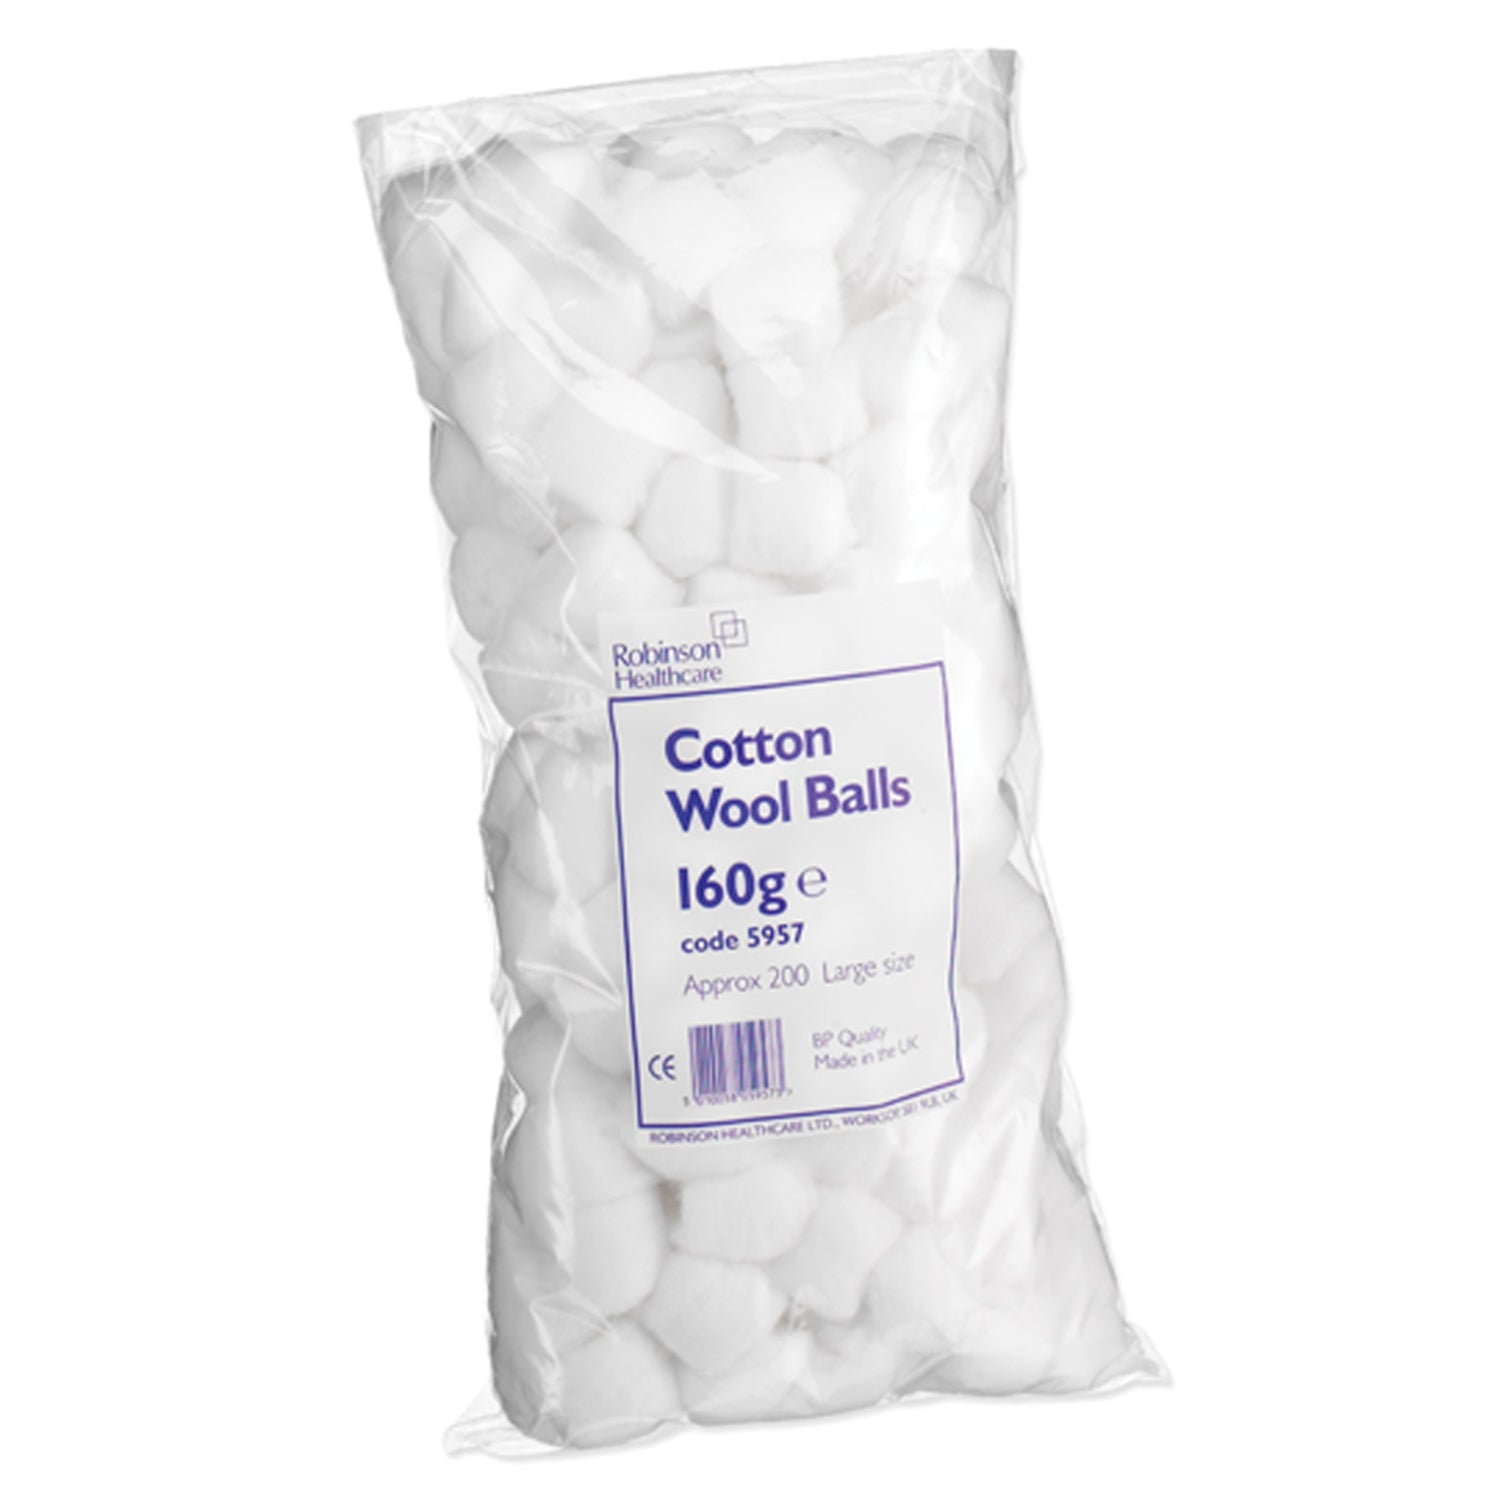 Robinsons Cotton Wool Balls | Pack of 200 (1)